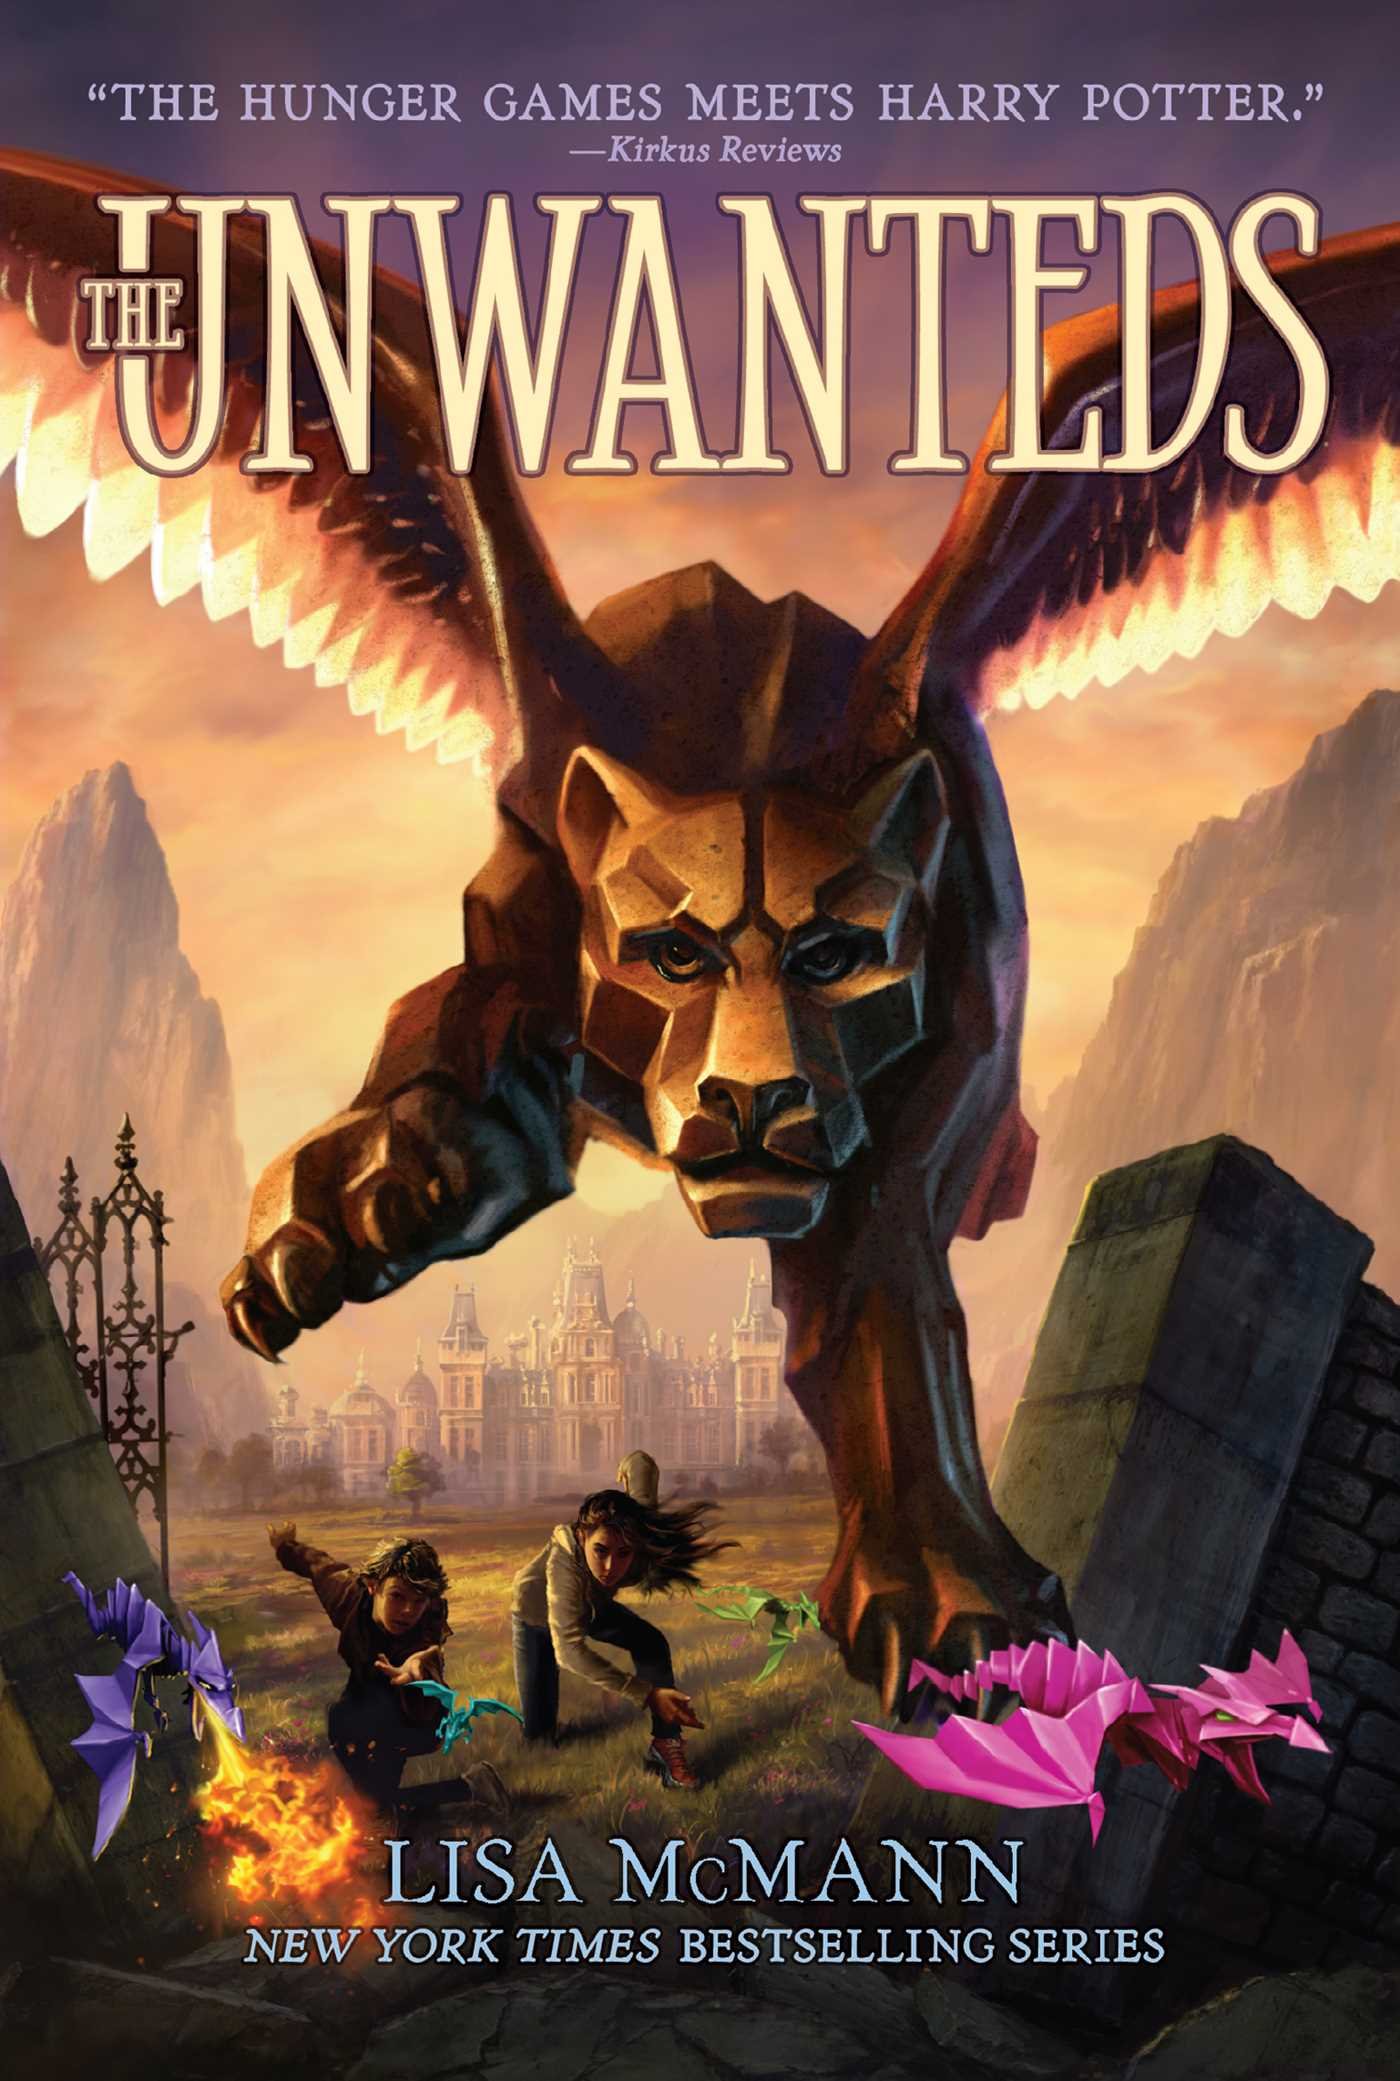 Image for "The Unwanteds"